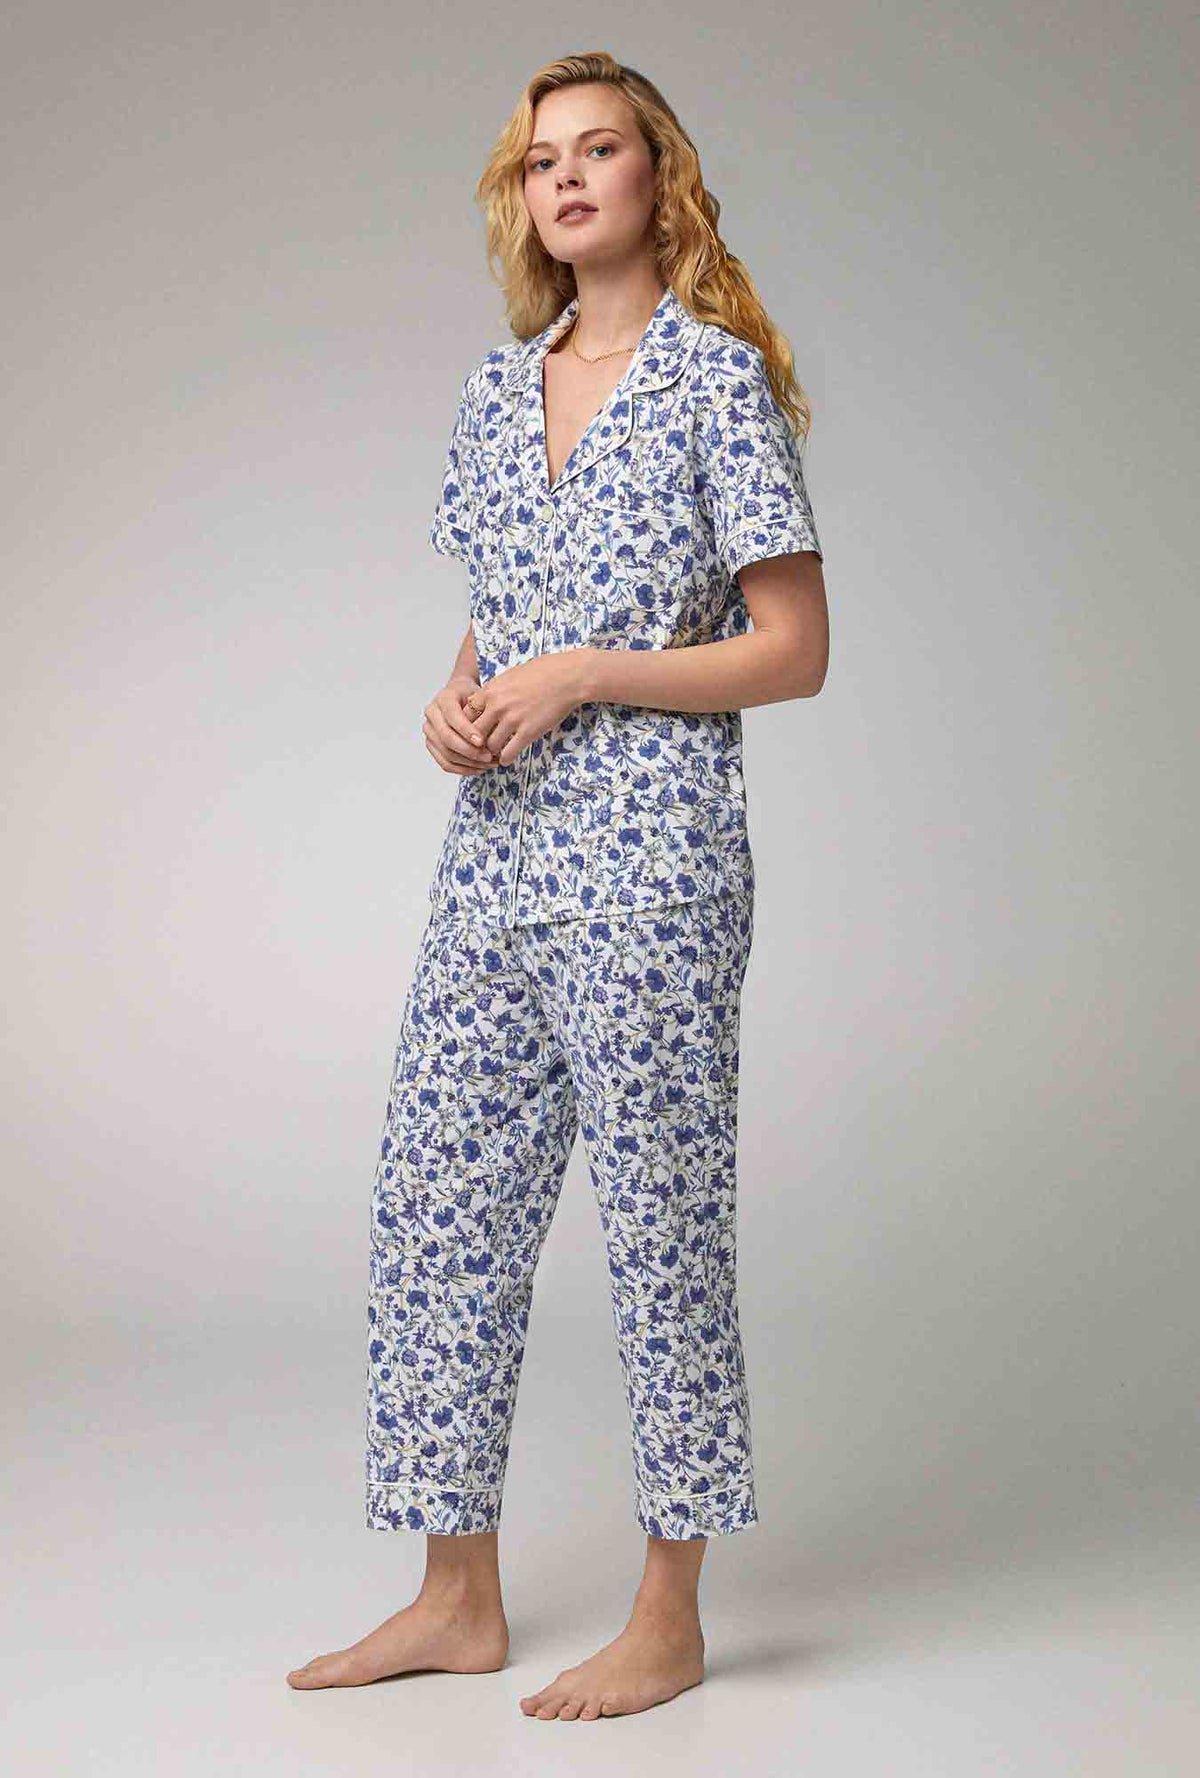 A lady wearing Short Sleeve Classic Stretch Jersey Cropped PJ Set with Terrance Floral print